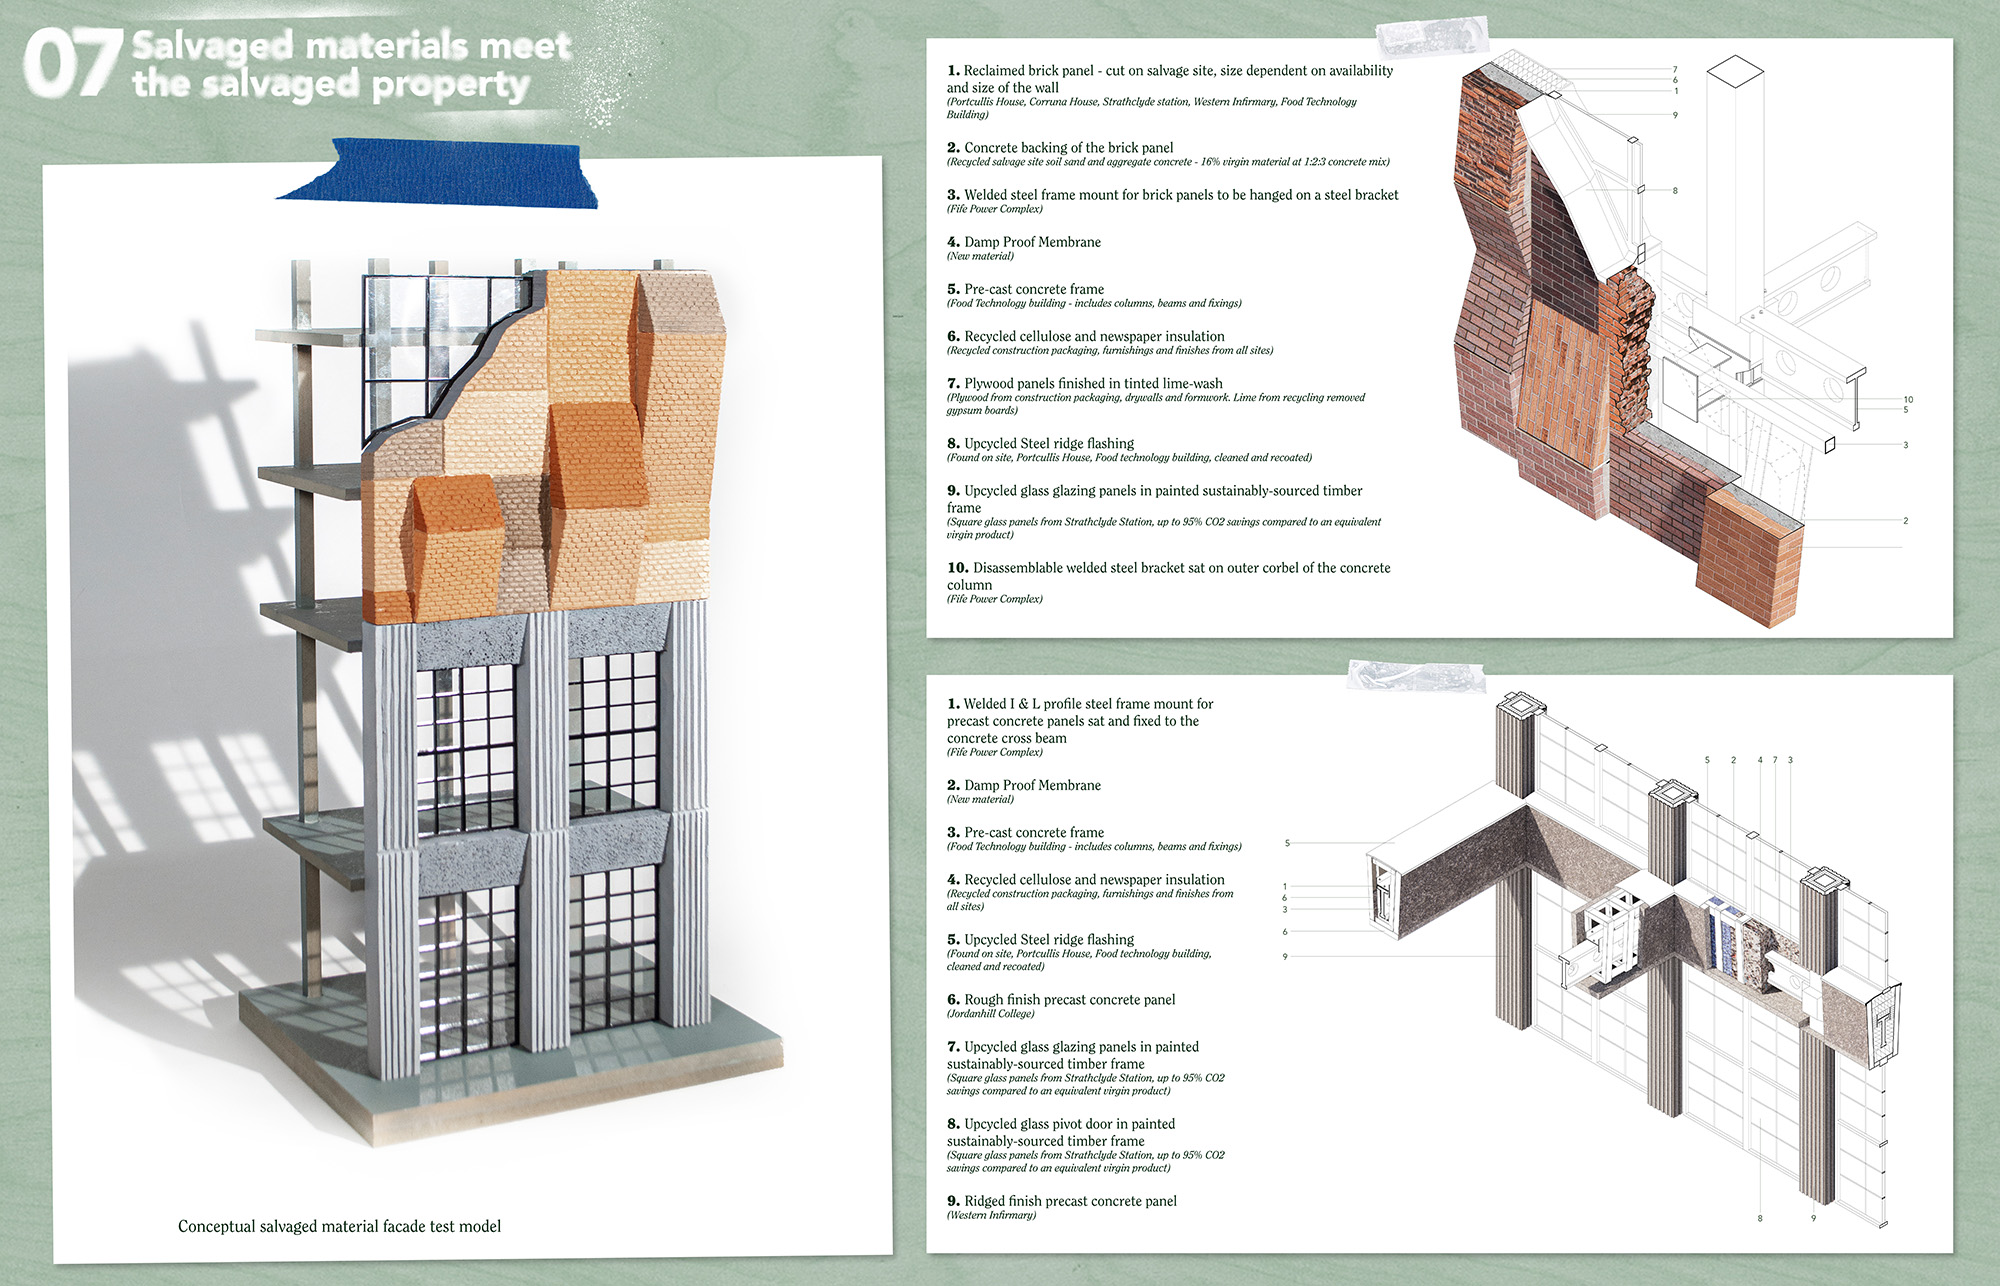 Page 7 of Karlis Kukainis winning entry to the A&DS and RIAS Scottish Student Award. The board includes an conceptual salvaged material facade test model with various materials that can be used for the project.